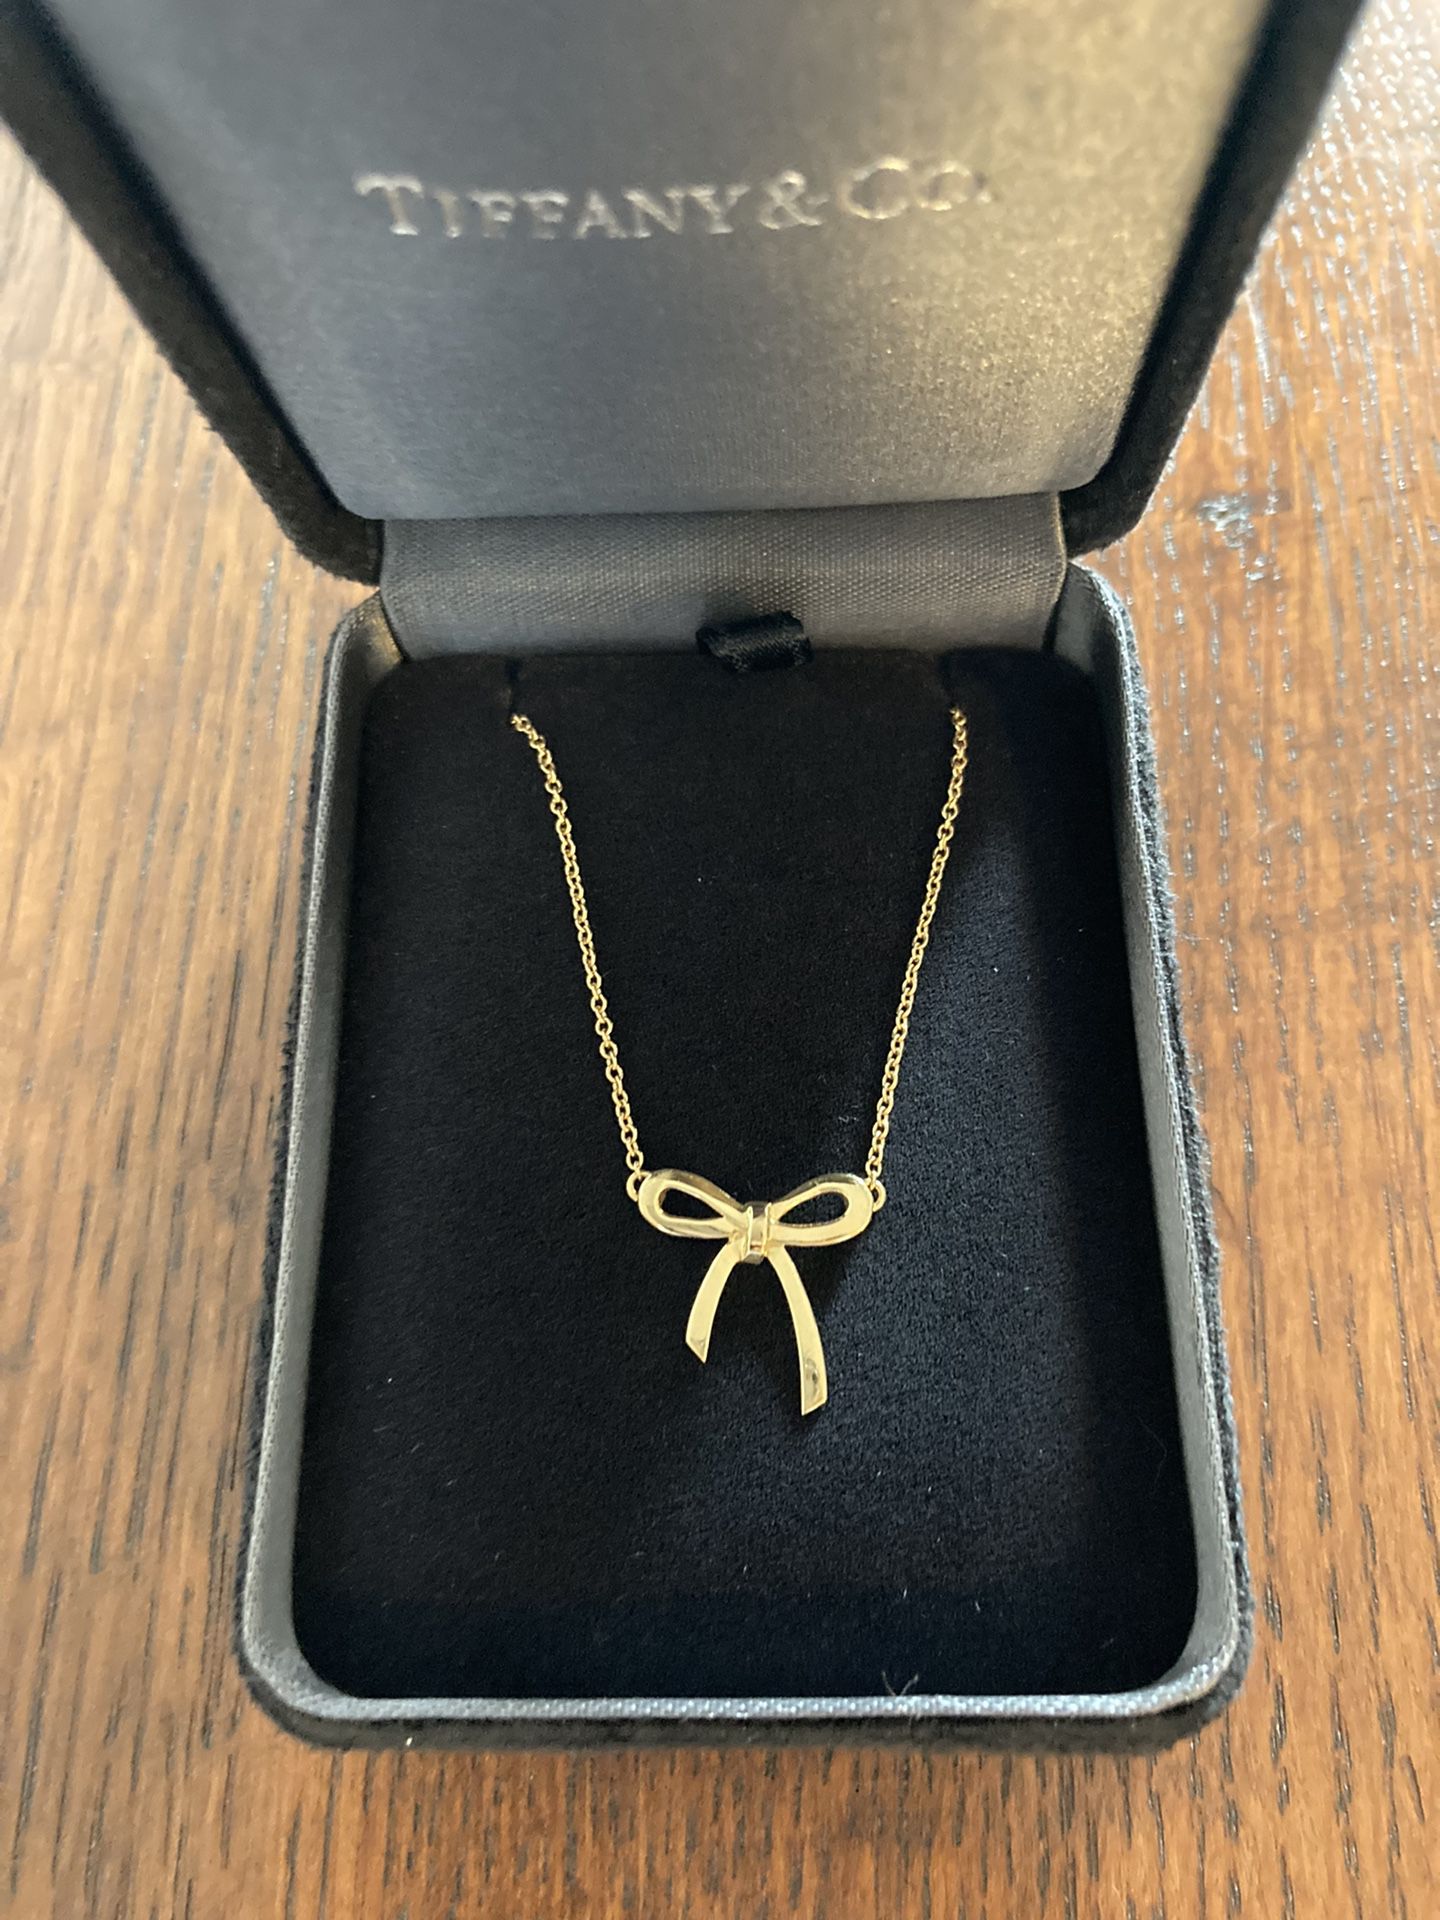 Tiffany and Co. 18K Gold Bow Tie Necklace 